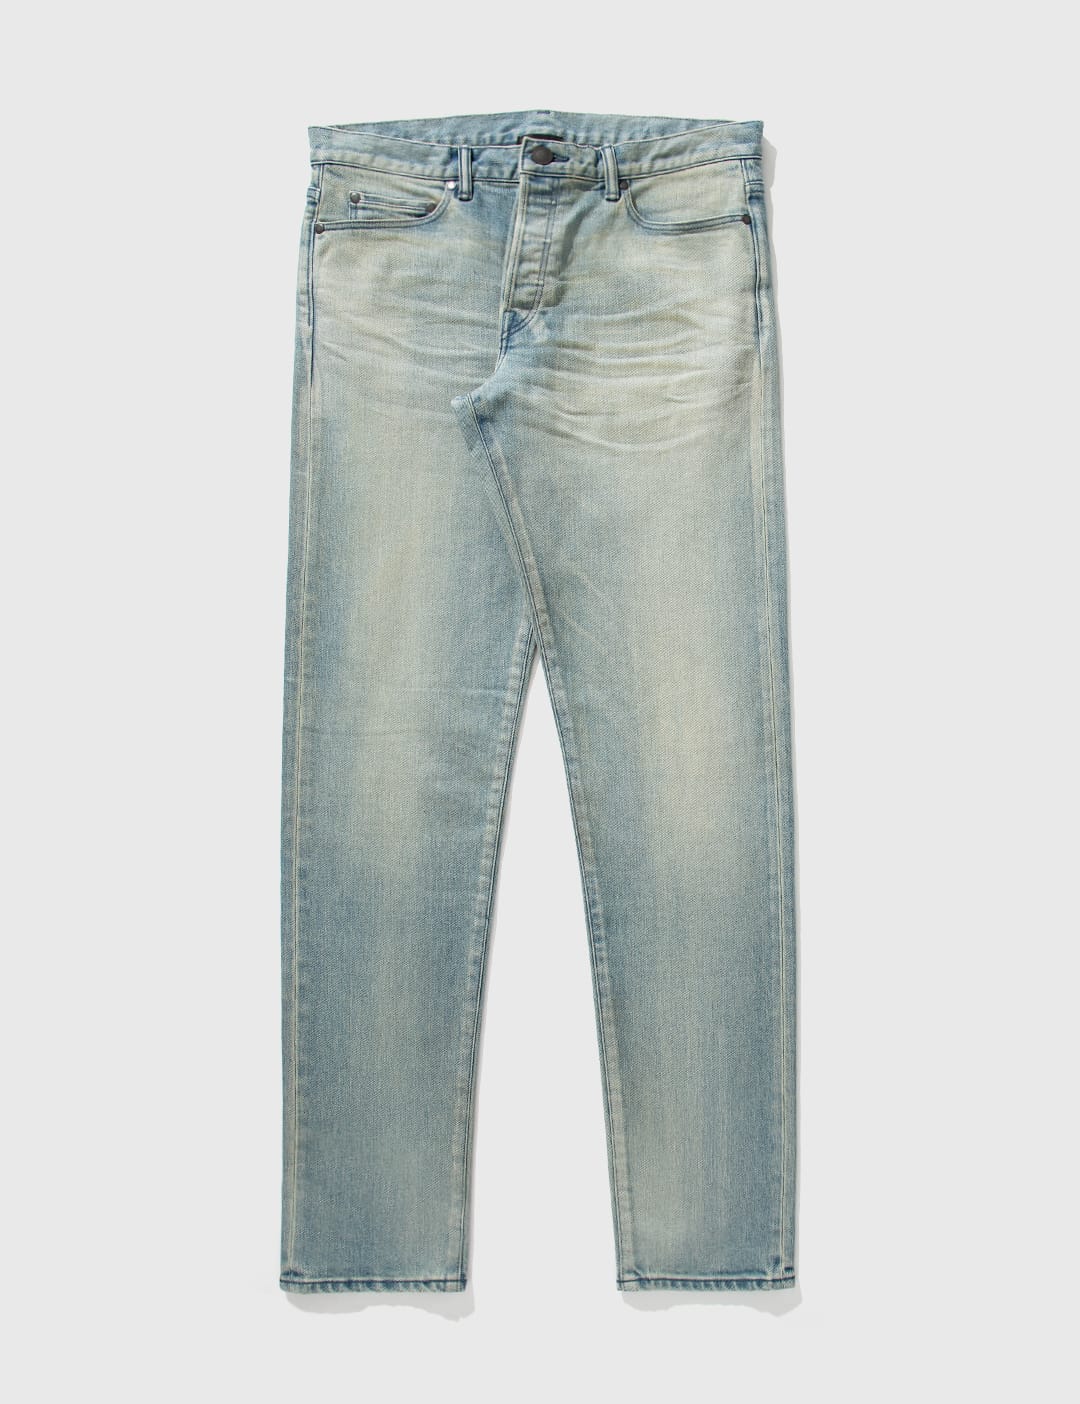 Story Mfg - Lush Jeans | HBX - Globally Curated Fashion and 